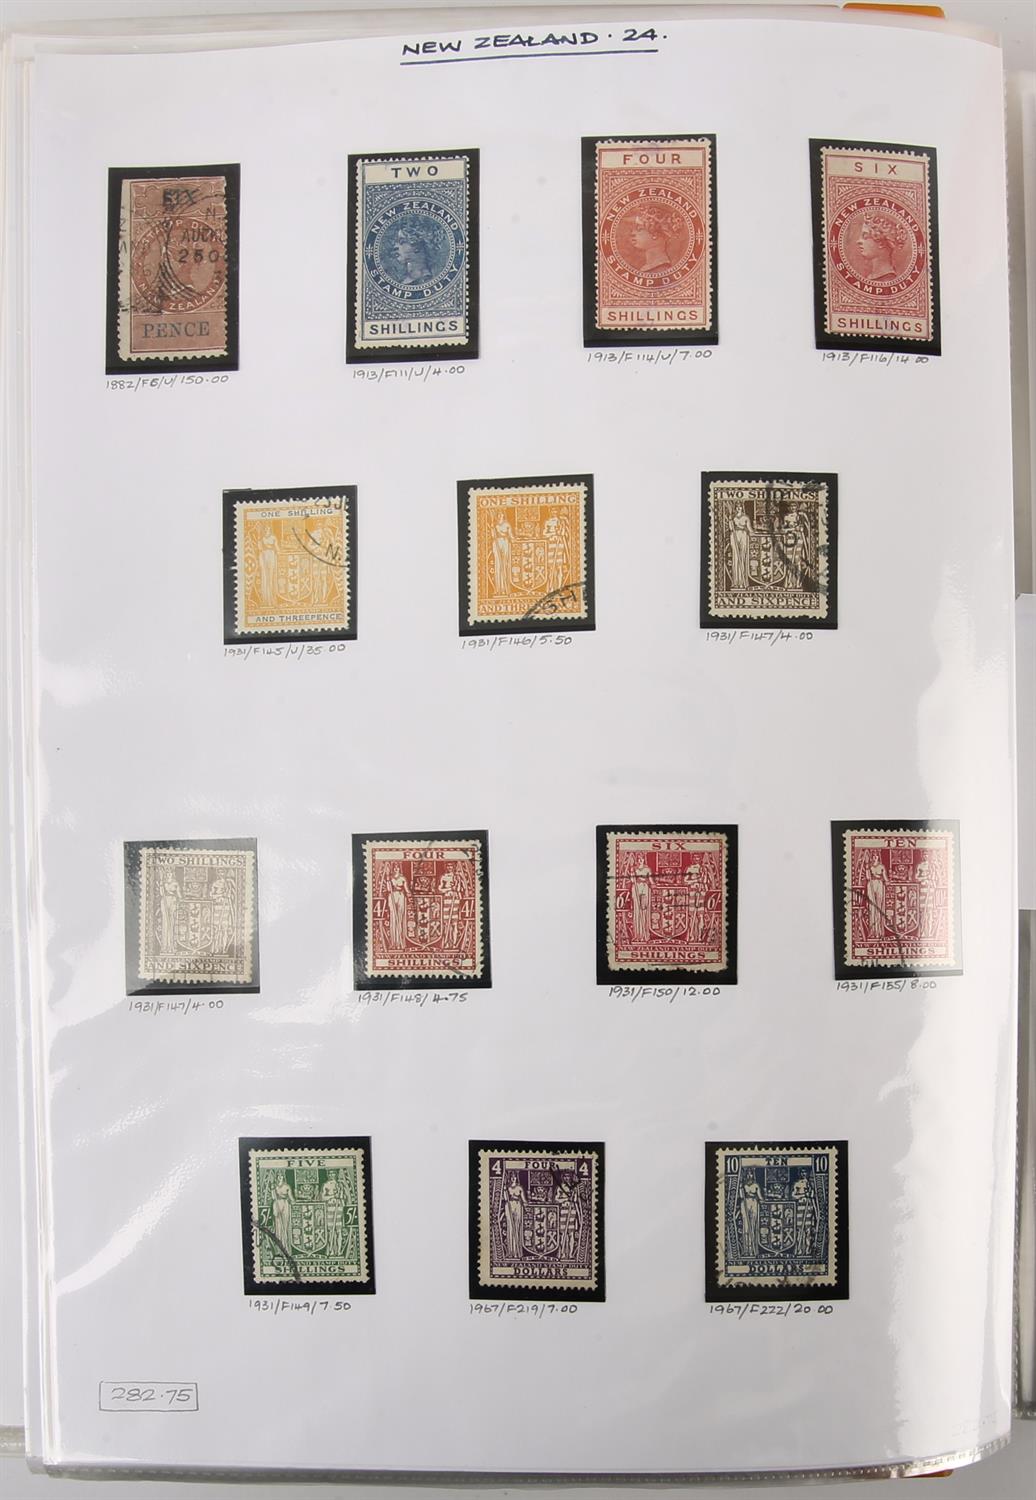 Albums(14) with orange spine, World Stamps, Mint and Used, with Bechuanaland, Canada, China, Cyprus, - Image 4 of 7